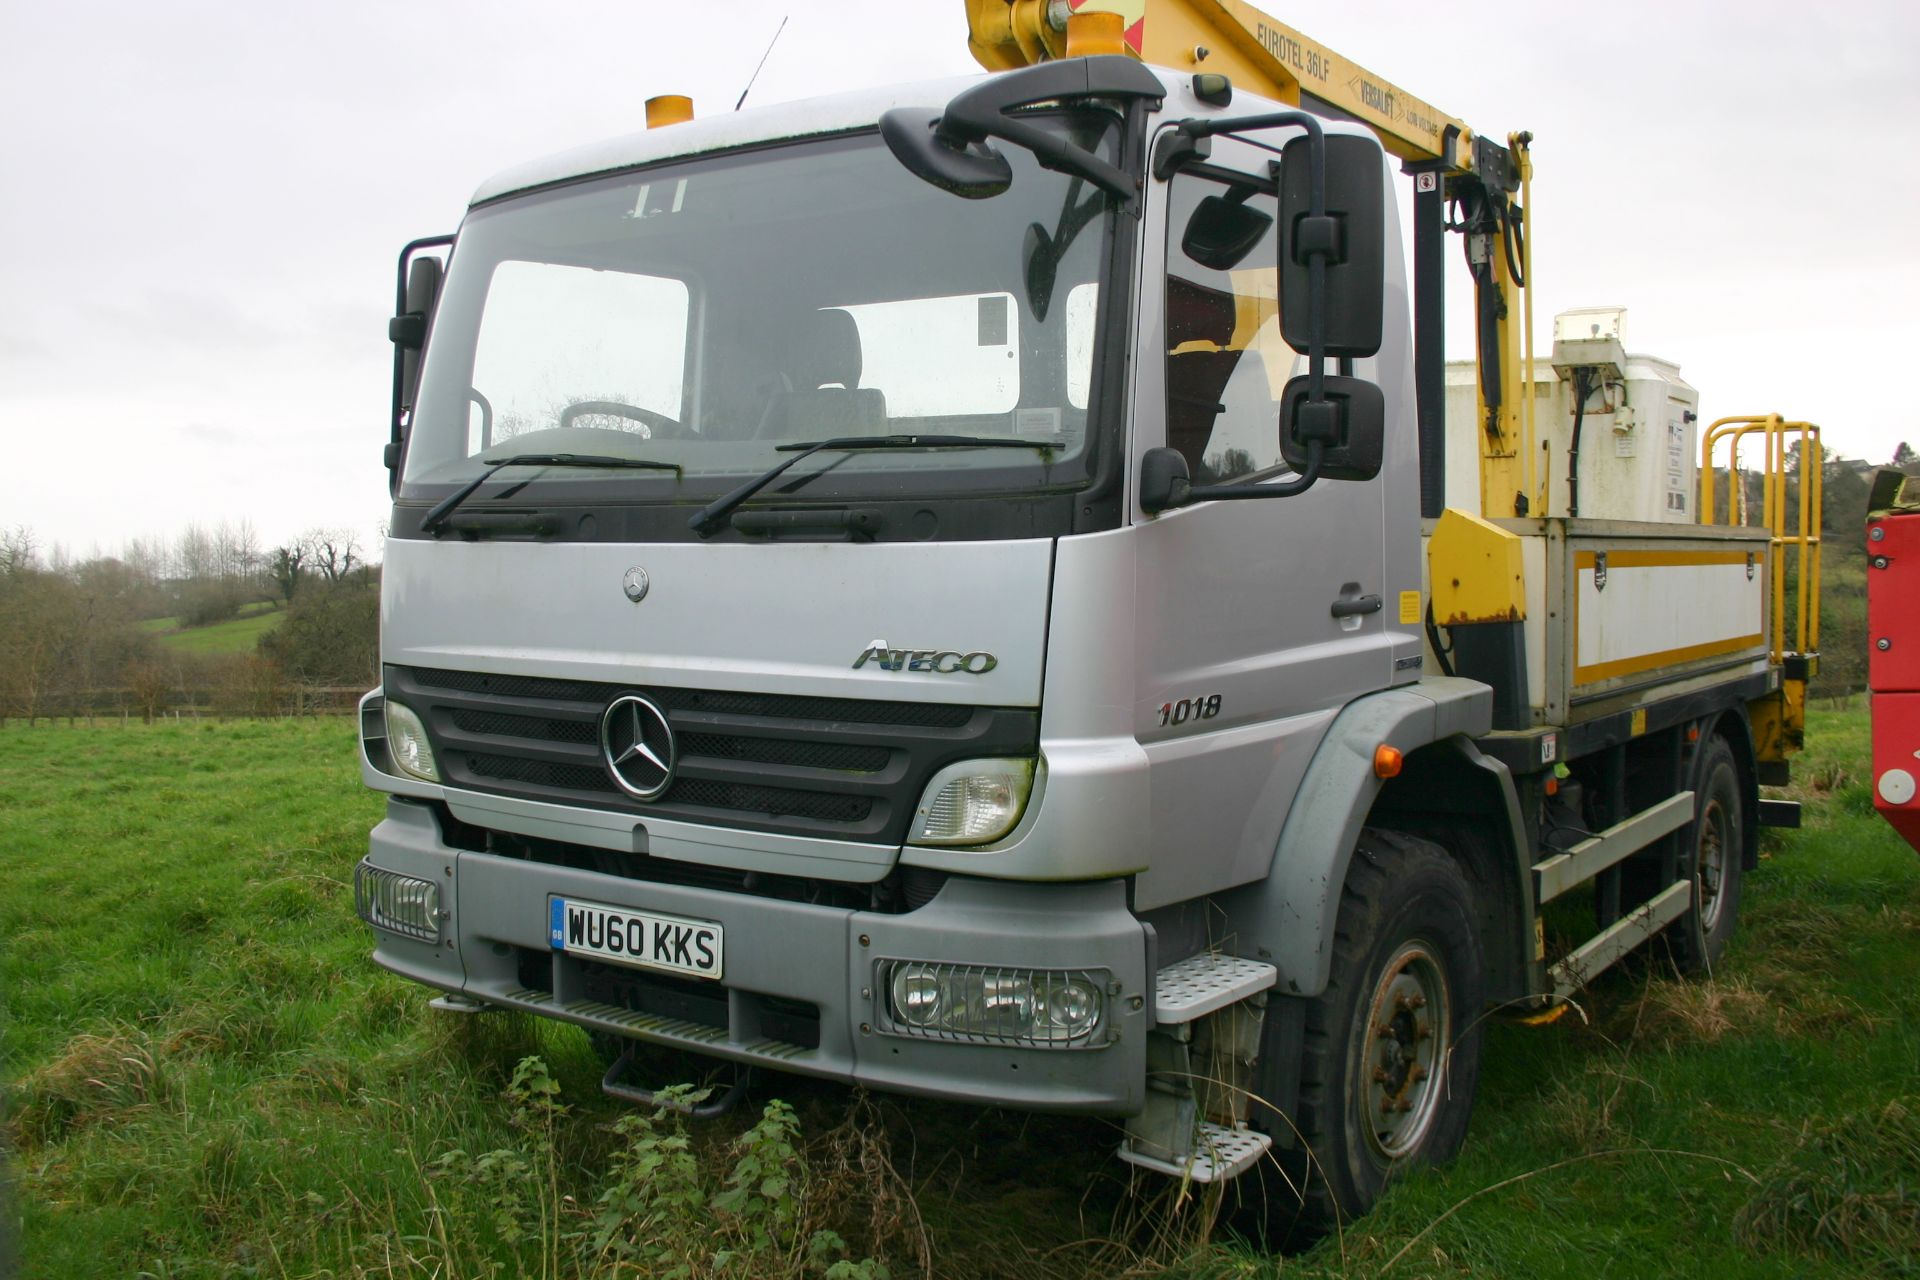 2011/60 REG MERCEDES ATEGO 1018 BLUETEC S 4.3 DIESEL 4WD TOWER WAGON, SHOWING 0 FORMER KEEPERS - Image 2 of 12